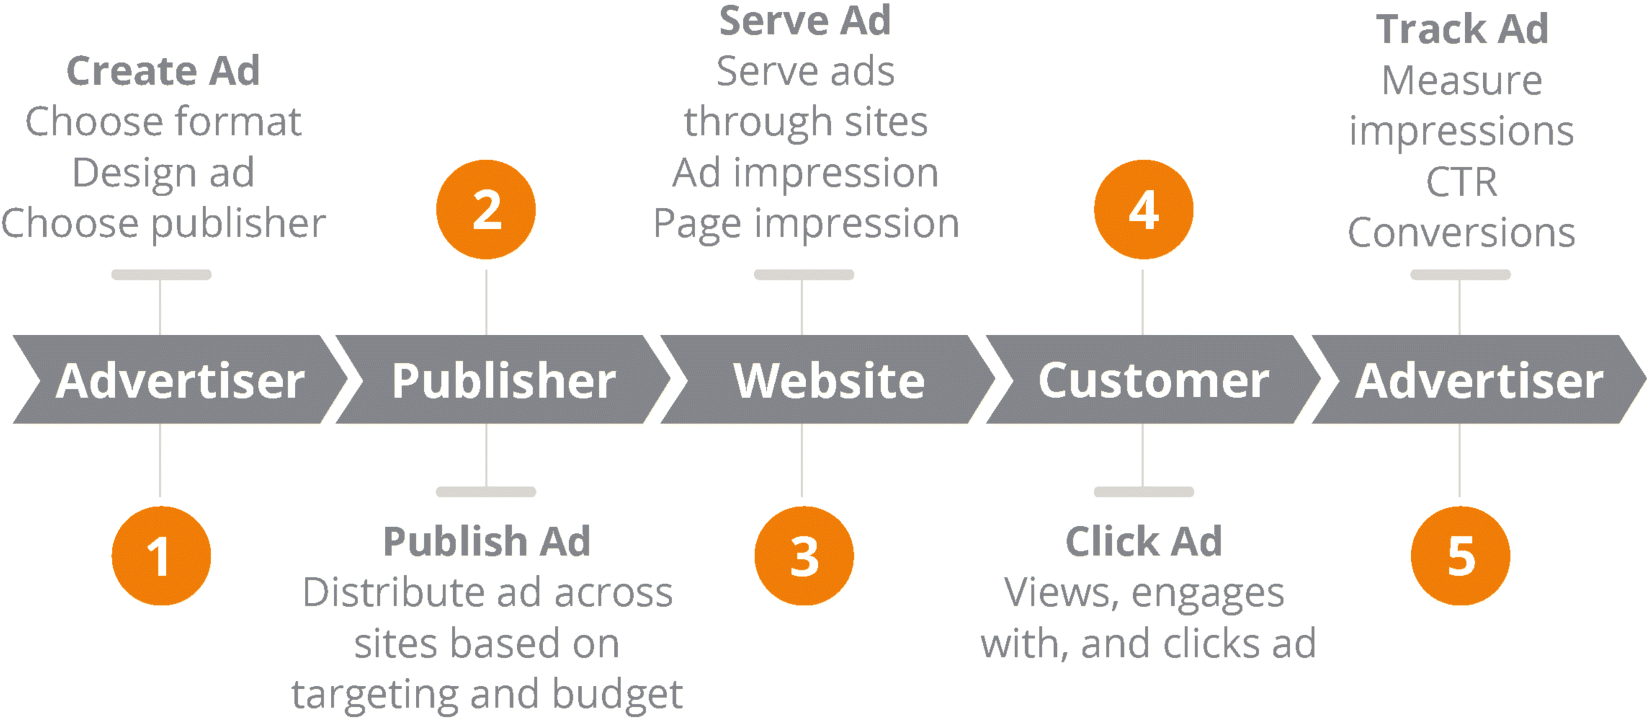 Figure depicting the key stakeholders in DDA represented by five rightward arrows in a series. Starting from left the arrows denote advertiser (create ad, design ad, and chooses format and publisher), publisher (publish ad, distributes ad across sites based on budget), website (serve ad through sites, ad impression, and page impression), customer (views, engages with, and clicks ad), and advertiser (tracks ad)